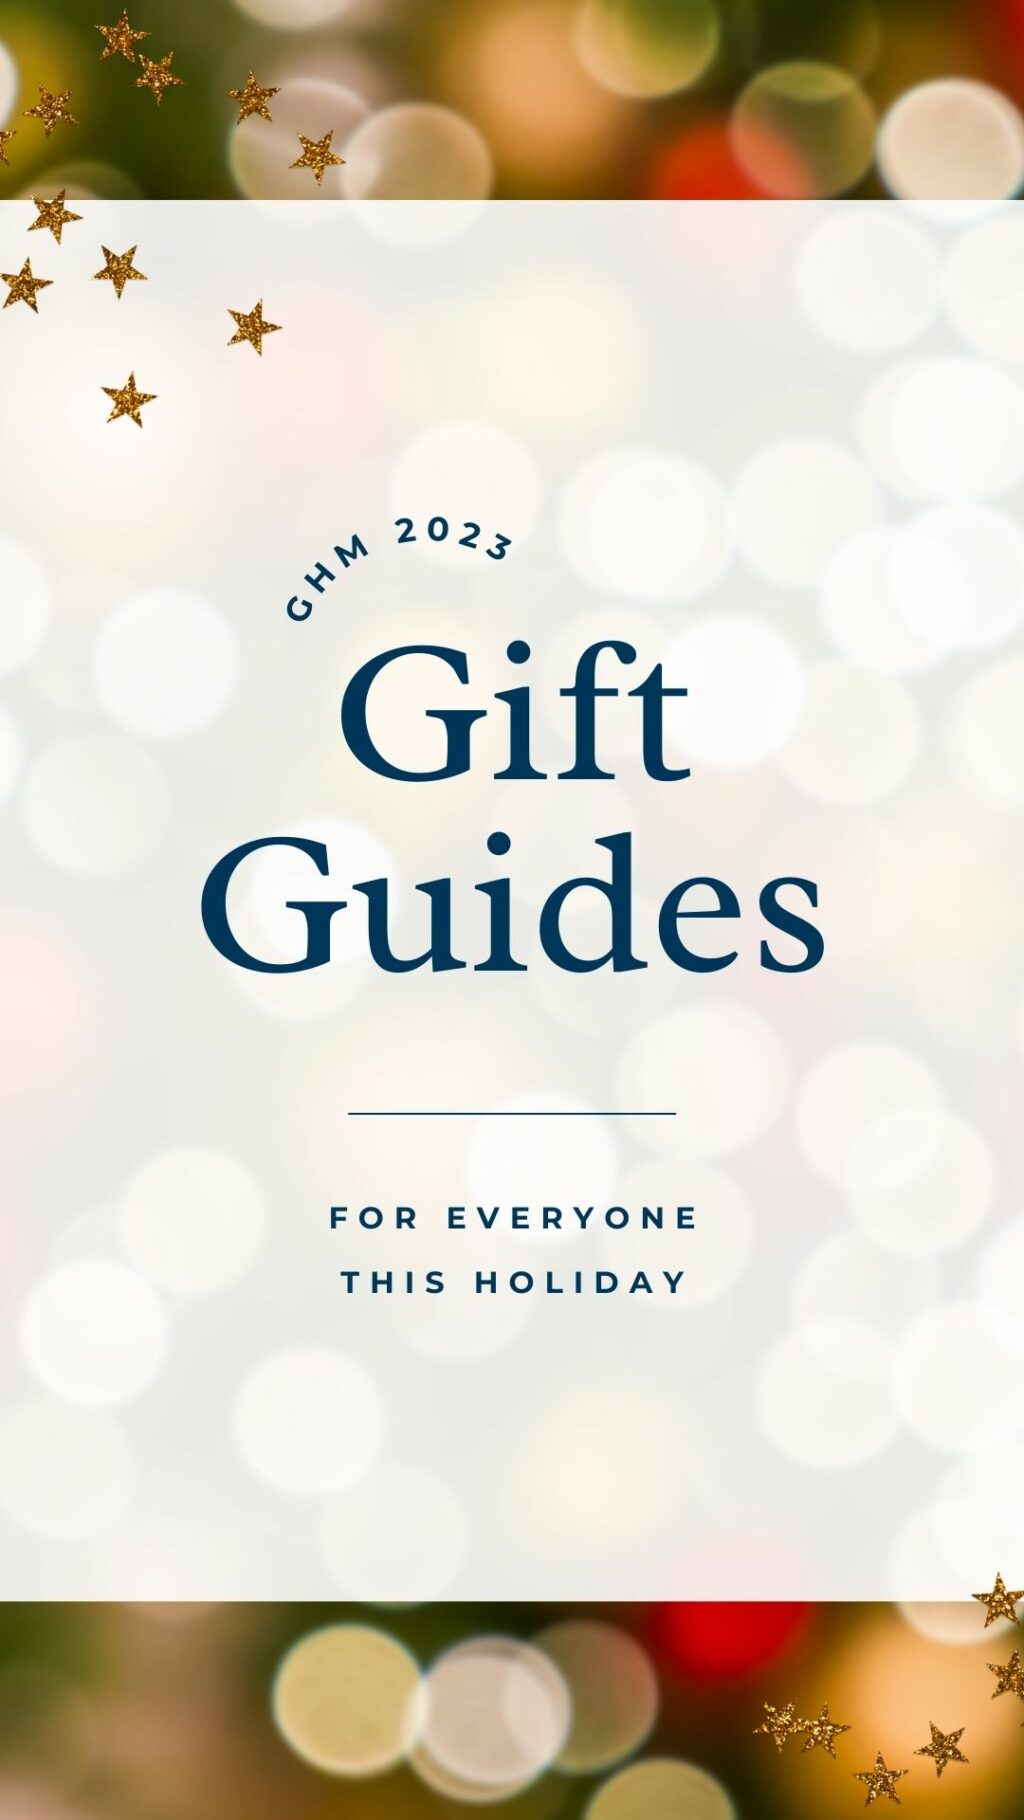 Gift Guides for Everyone